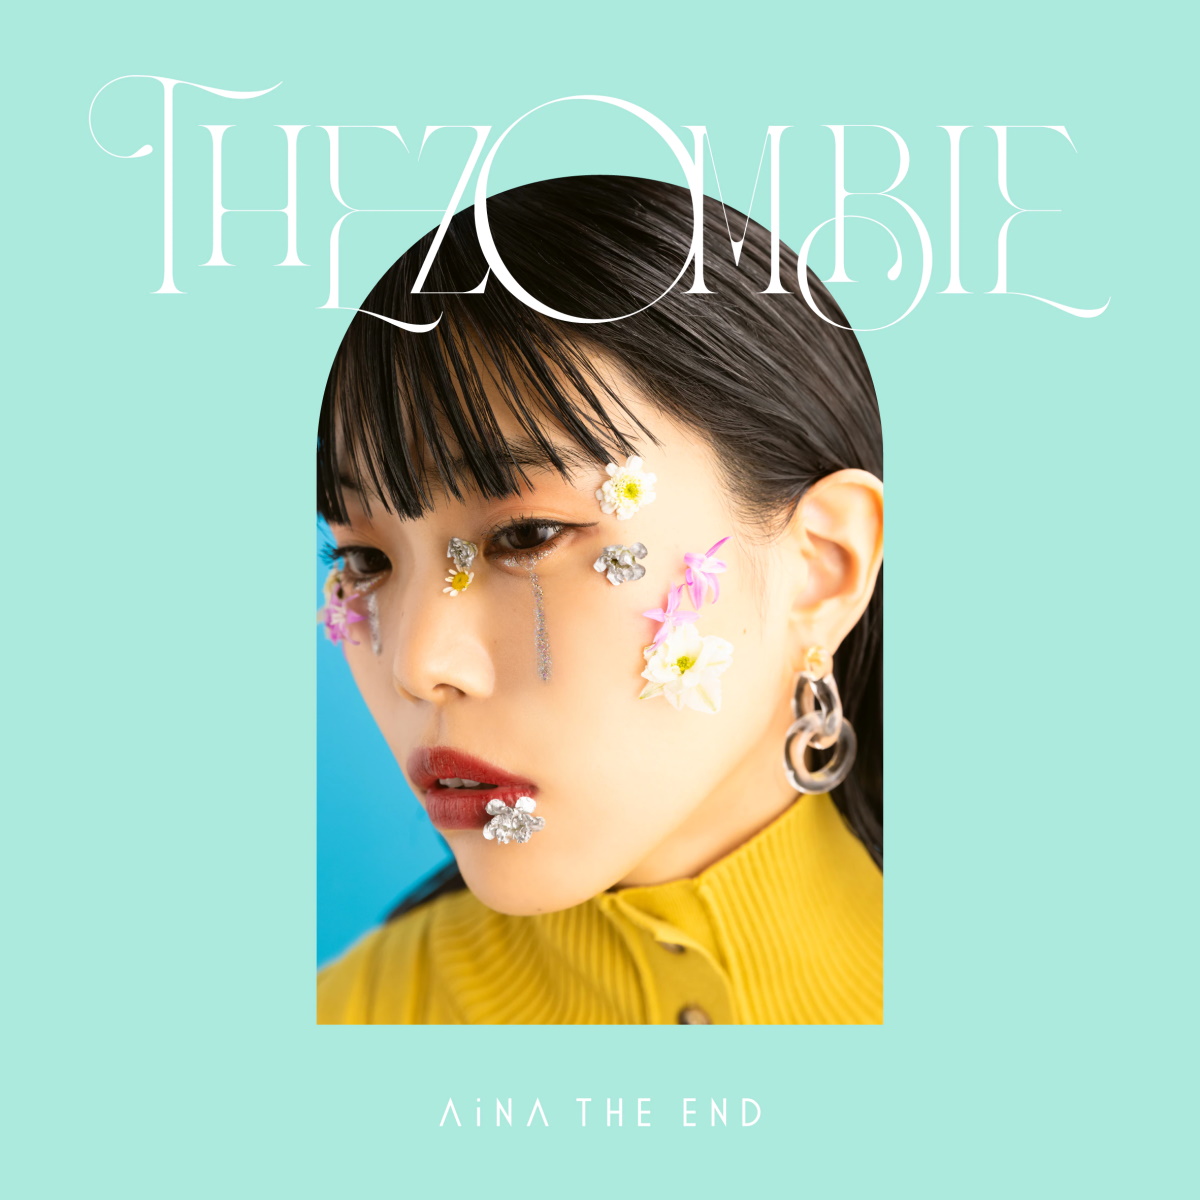 Cover for『AiNA THE END - Happy Birthday』from the release『THE ZOMBIE』